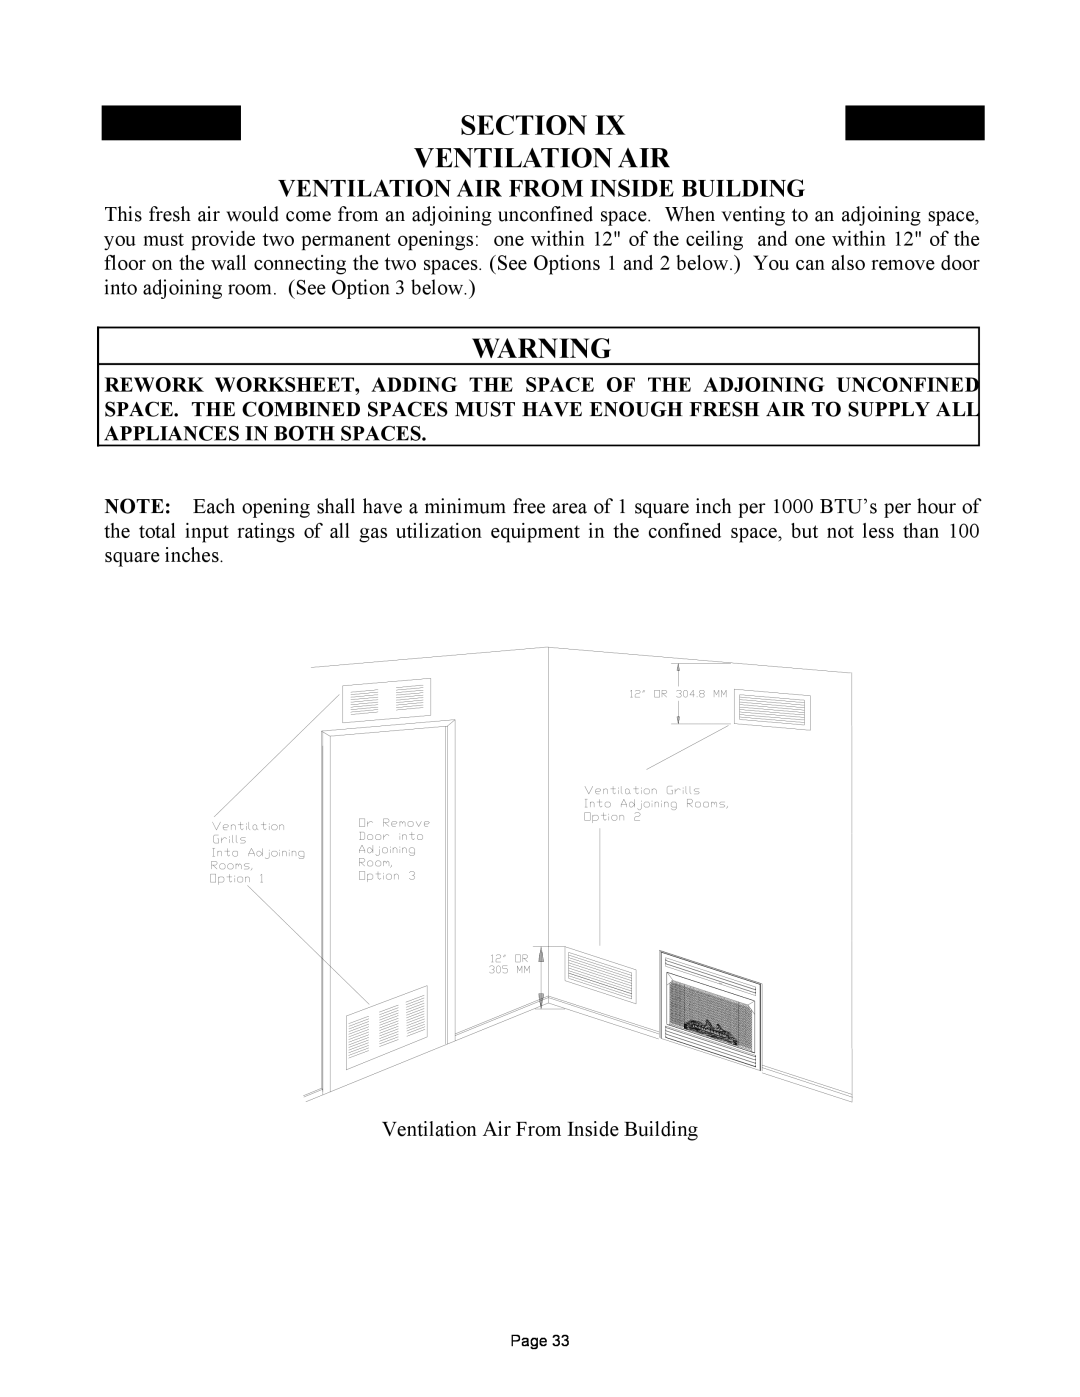 New Buck Corporation 384 manual Section Ventilation Air, Ventilation Air From Inside Building 